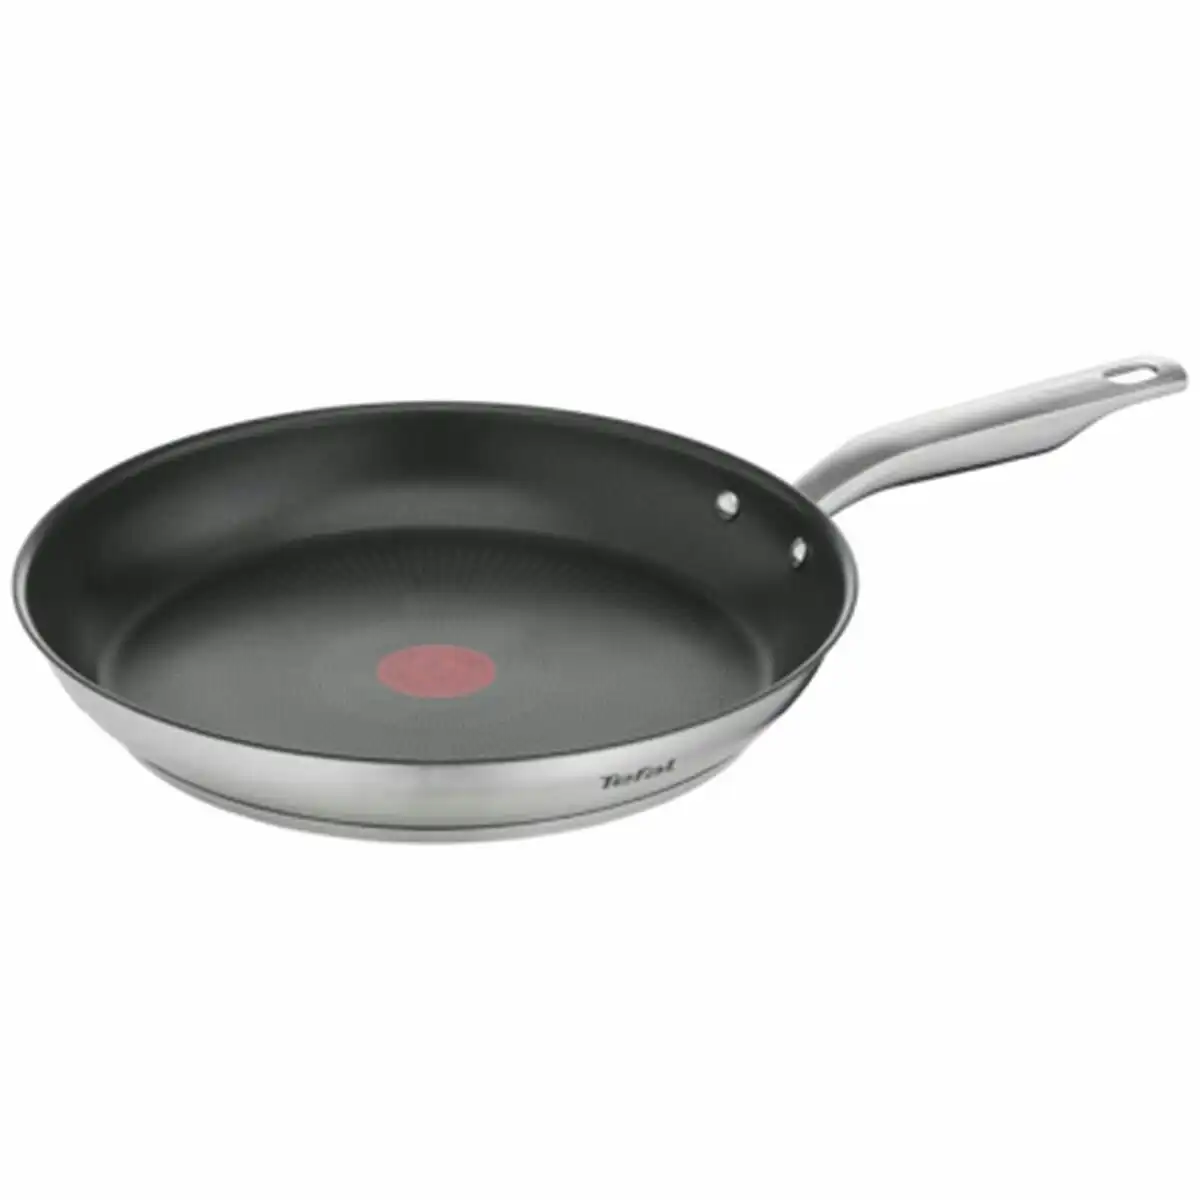 Tefal 28cm Virtuoso Stainless Steel Non-stick Induction Frying Pan